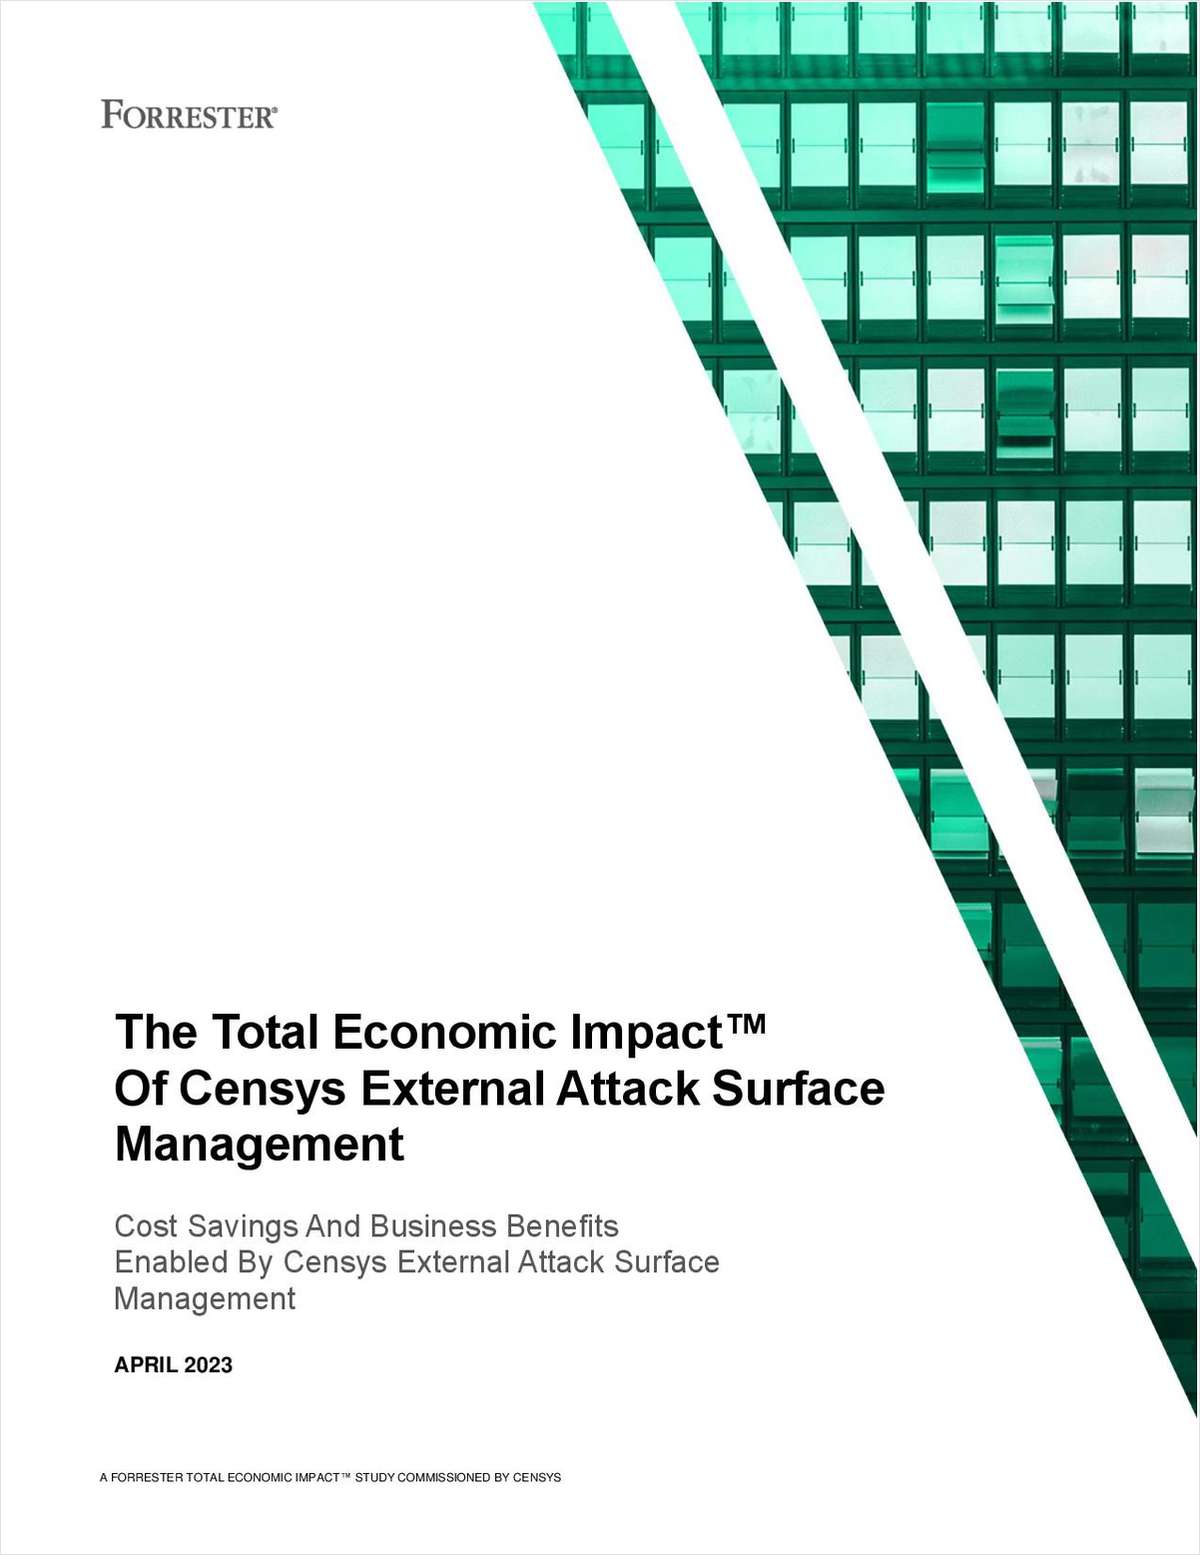 Forrester Consulting: The Total Economic Impact™ of Censys External Attack Surface Management